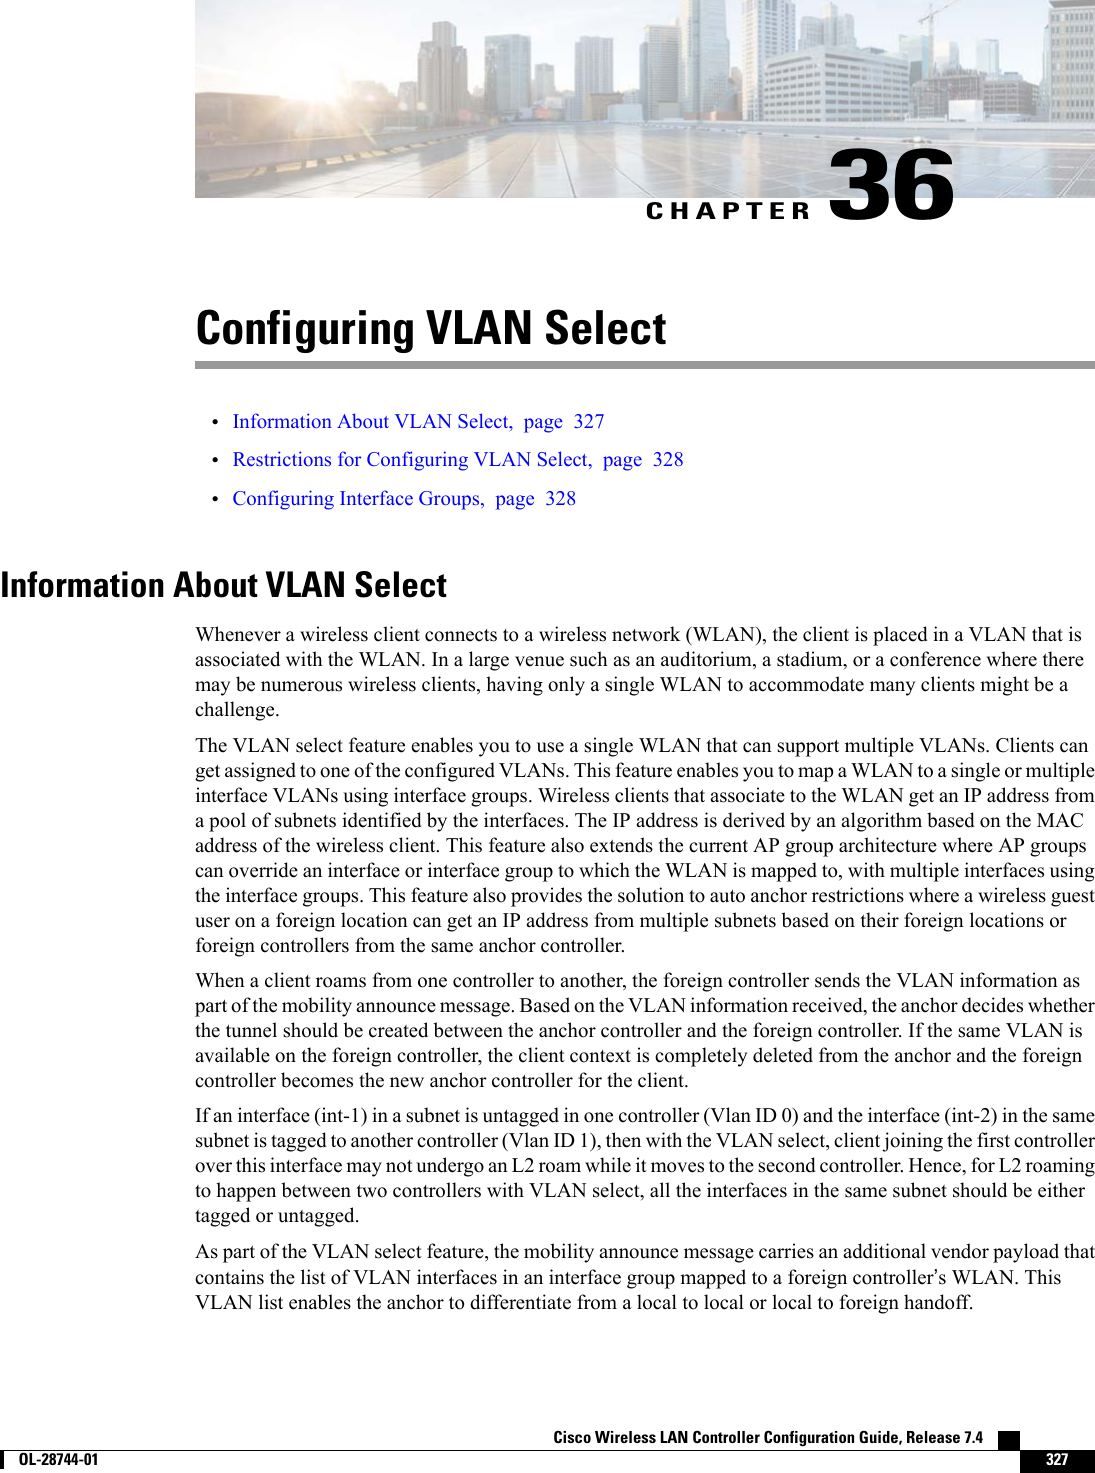 CHAPTER 36Configuring VLAN Select•Information About VLAN Select, page 327•Restrictions for Configuring VLAN Select, page 328•Configuring Interface Groups, page 328Information About VLAN SelectWhenever a wireless client connects to a wireless network (WLAN), the client is placed in a VLAN that isassociated with the WLAN. In a large venue such as an auditorium, a stadium, or a conference where theremay be numerous wireless clients, having only a single WLAN to accommodate many clients might be achallenge.The VLAN select feature enables you to use a single WLAN that can support multiple VLANs. Clients canget assigned to one of the configured VLANs. This feature enables you to map a WLAN to a single or multipleinterface VLANs using interface groups. Wireless clients that associate to the WLAN get an IP address froma pool of subnets identified by the interfaces. The IP address is derived by an algorithm based on the MACaddress of the wireless client. This feature also extends the current AP group architecture where AP groupscan override an interface or interface group to which the WLAN is mapped to, with multiple interfaces usingthe interface groups. This feature also provides the solution to auto anchor restrictions where a wireless guestuser on a foreign location can get an IP address from multiple subnets based on their foreign locations orforeign controllers from the same anchor controller.When a client roams from one controller to another, the foreign controller sends the VLAN information aspart of the mobility announce message. Based on the VLAN information received, the anchor decides whetherthe tunnel should be created between the anchor controller and the foreign controller. If the same VLAN isavailable on the foreign controller, the client context is completely deleted from the anchor and the foreigncontroller becomes the new anchor controller for the client.If an interface (int-1) in a subnet is untagged in one controller (Vlan ID 0) and the interface (int-2) in the samesubnet is tagged to another controller (Vlan ID 1), then with the VLAN select, client joining the first controllerover this interface may not undergo an L2 roam while it moves to the second controller. Hence, for L2 roamingto happen between two controllers with VLAN select, all the interfaces in the same subnet should be eithertagged or untagged.As part of the VLAN select feature, the mobility announce message carries an additional vendor payload thatcontains the list of VLAN interfaces in an interface group mapped to a foreign controller’s WLAN. ThisVLAN list enables the anchor to differentiate from a local to local or local to foreign handoff.Cisco Wireless LAN Controller Configuration Guide, Release 7.4        OL-28744-01 327